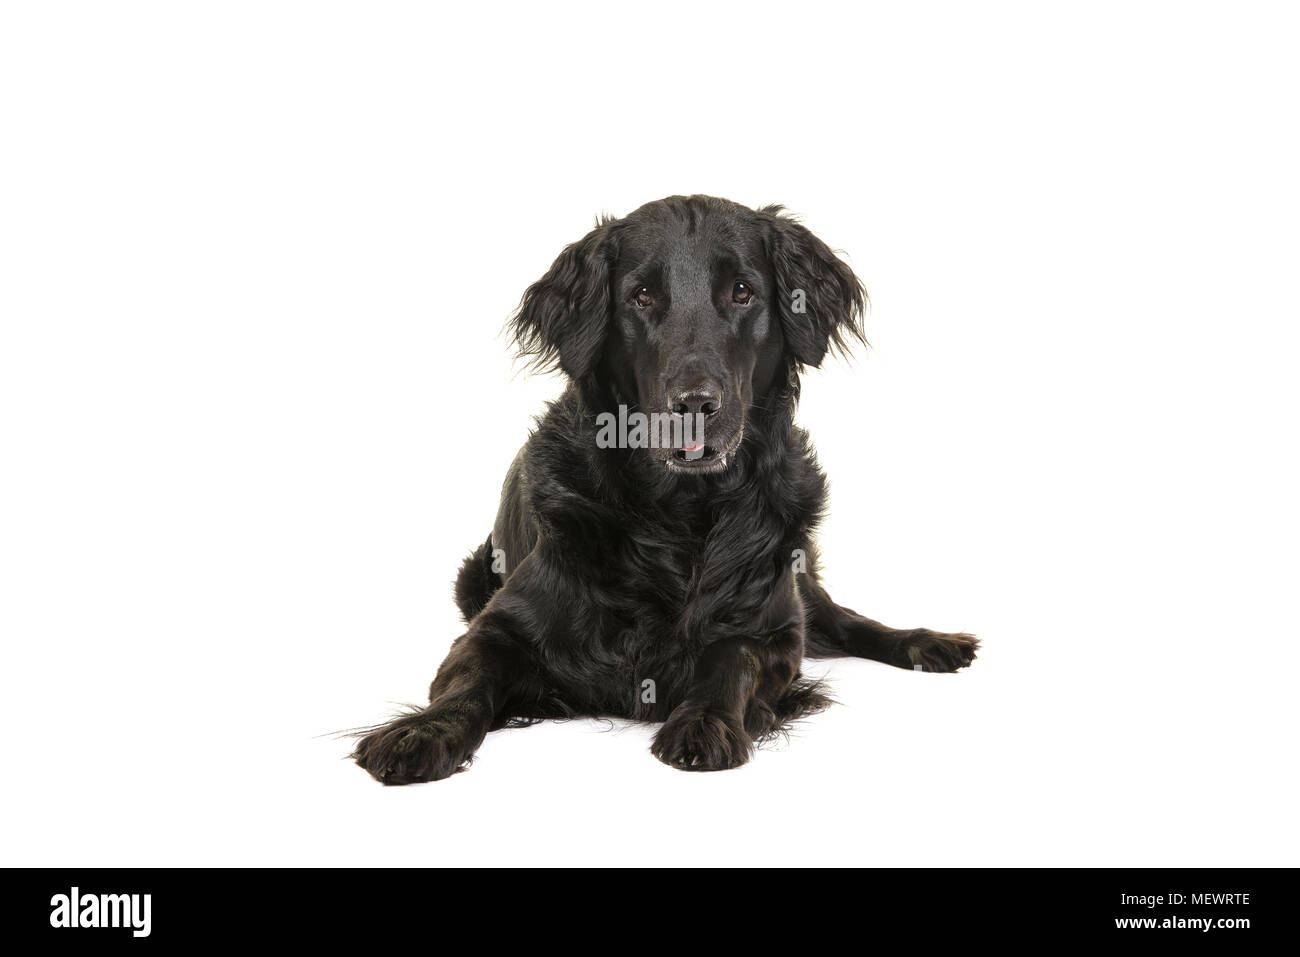 Black flatcoat retriever dog lying down looking at camera seen from the front on a white background Stock Photo